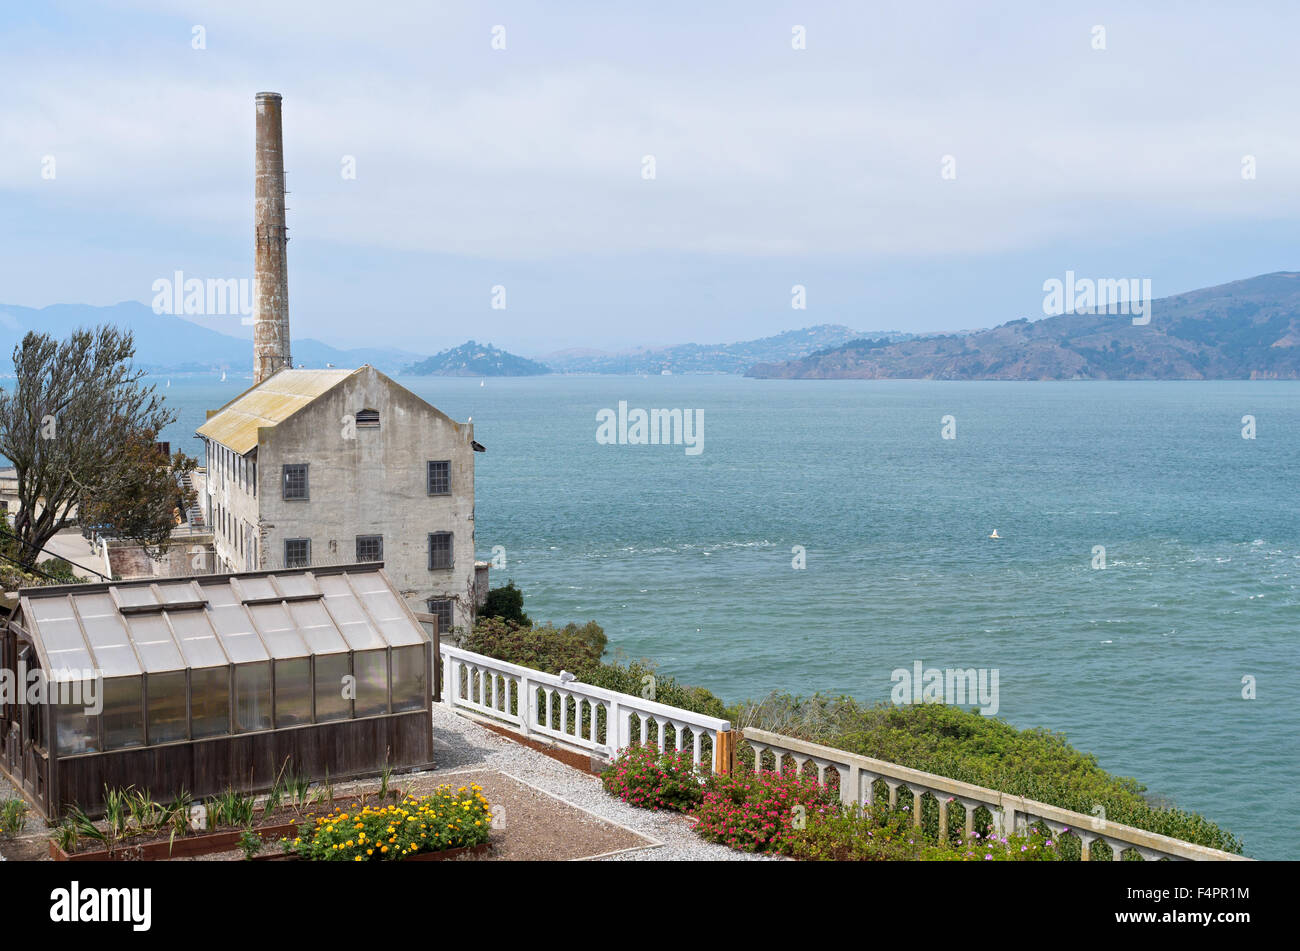 powerhouse or utility house and greenhouse on alcatraz island in san francisco bay of california overlooking pacific ocean Stock Photo